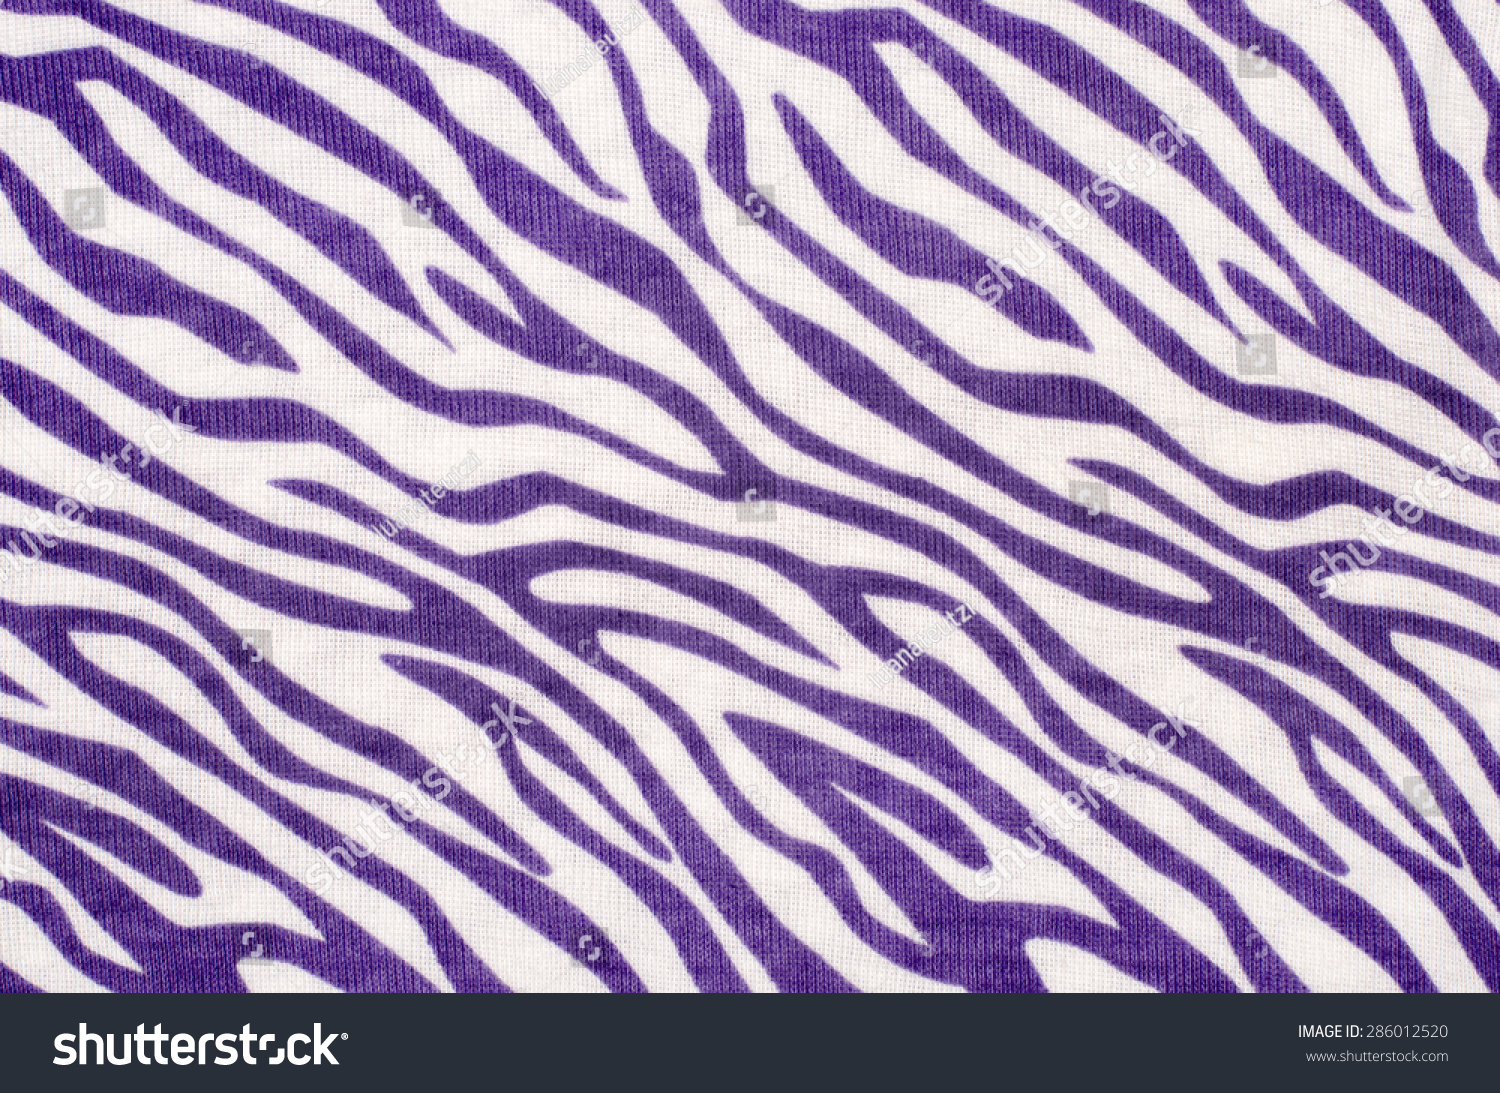 Purple White Zebra Pattern Violet Animal Backgrounds Textures Stock Image 286012520,Home Indian Baby Shower Decorations